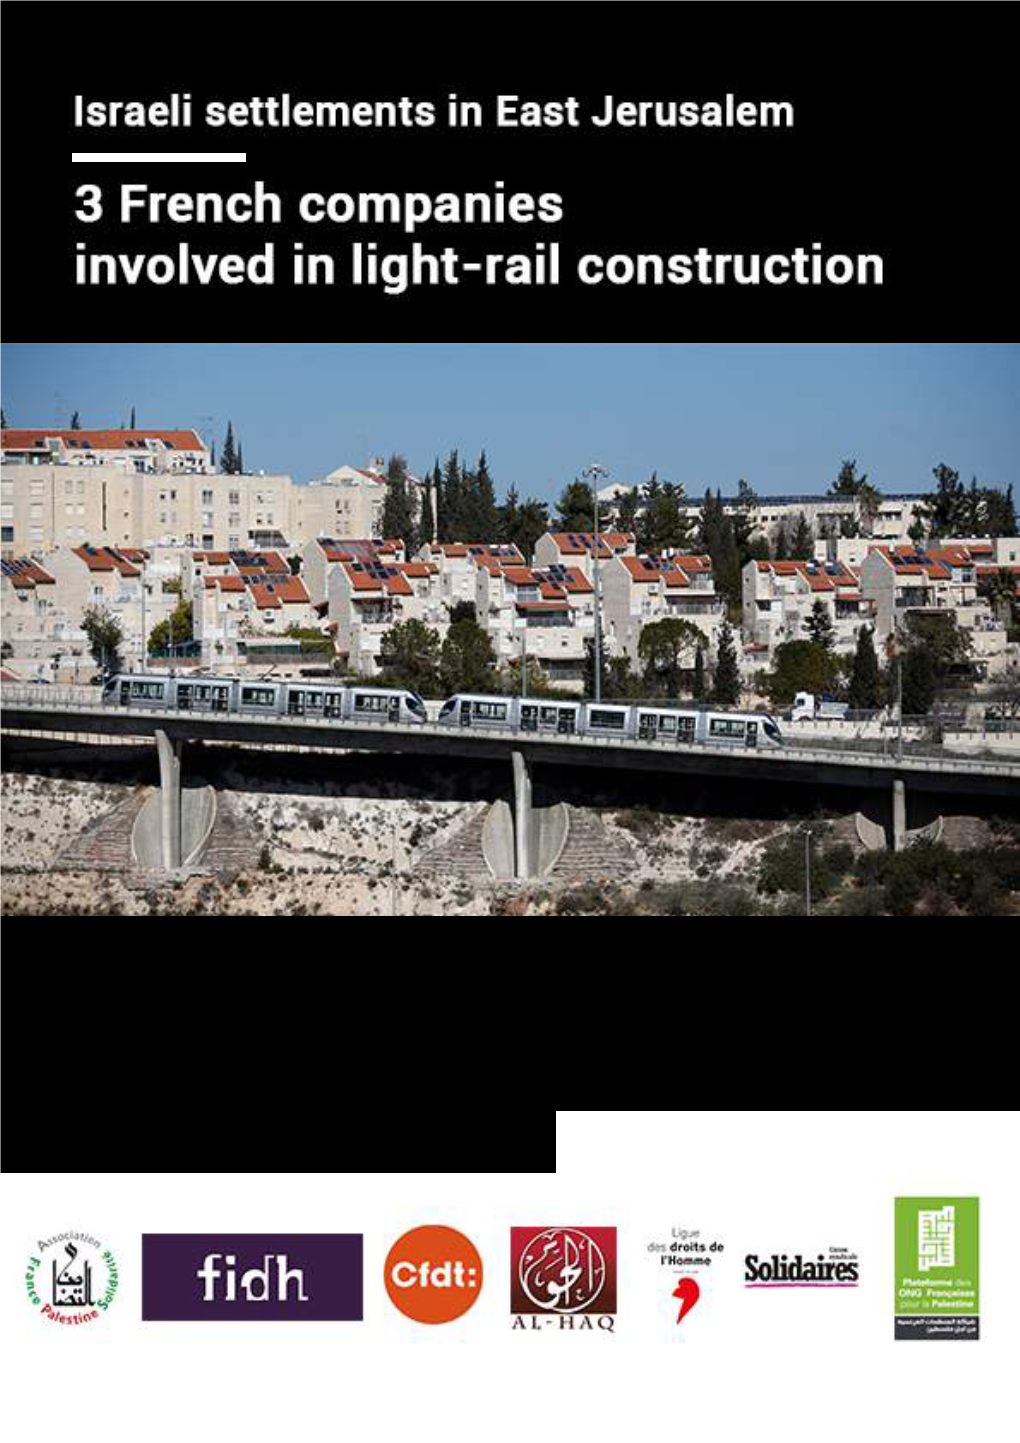 The Jerusalem Light-Rail System and How French Companies Contribute